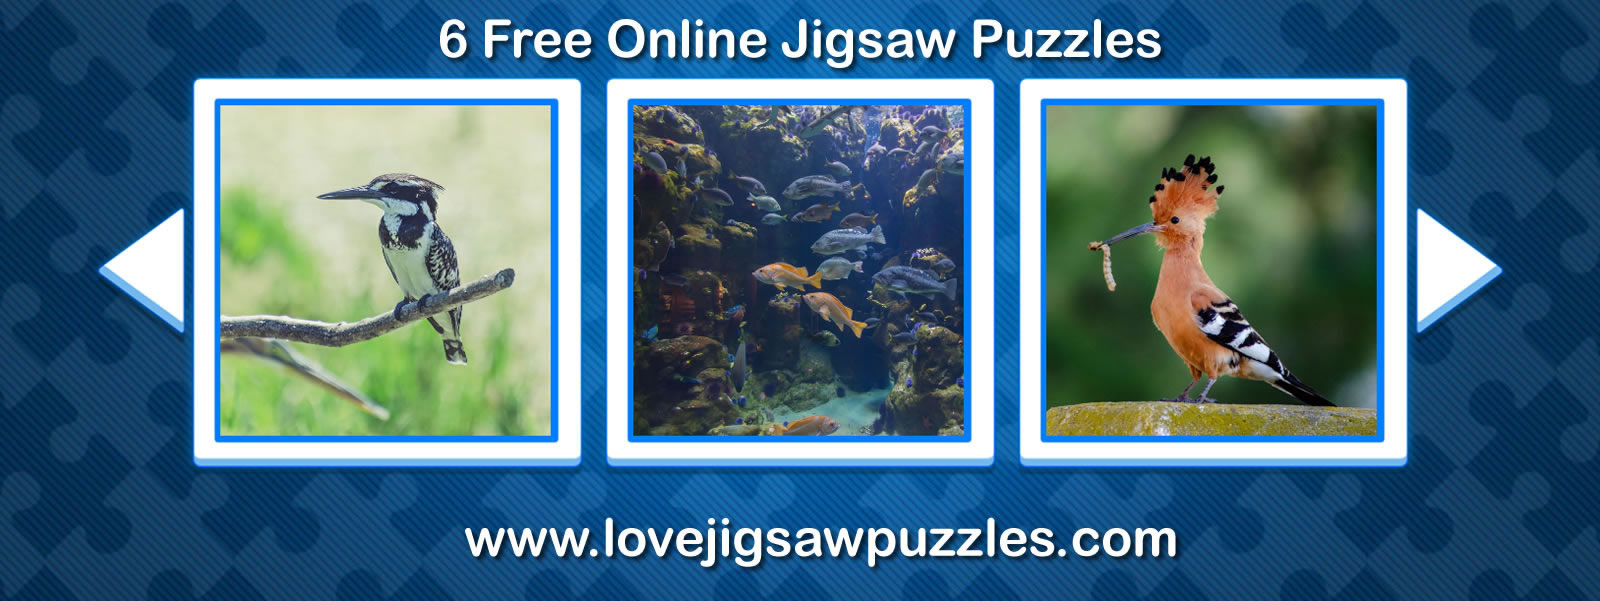 Free Jigsaw Puzzles of Lemures